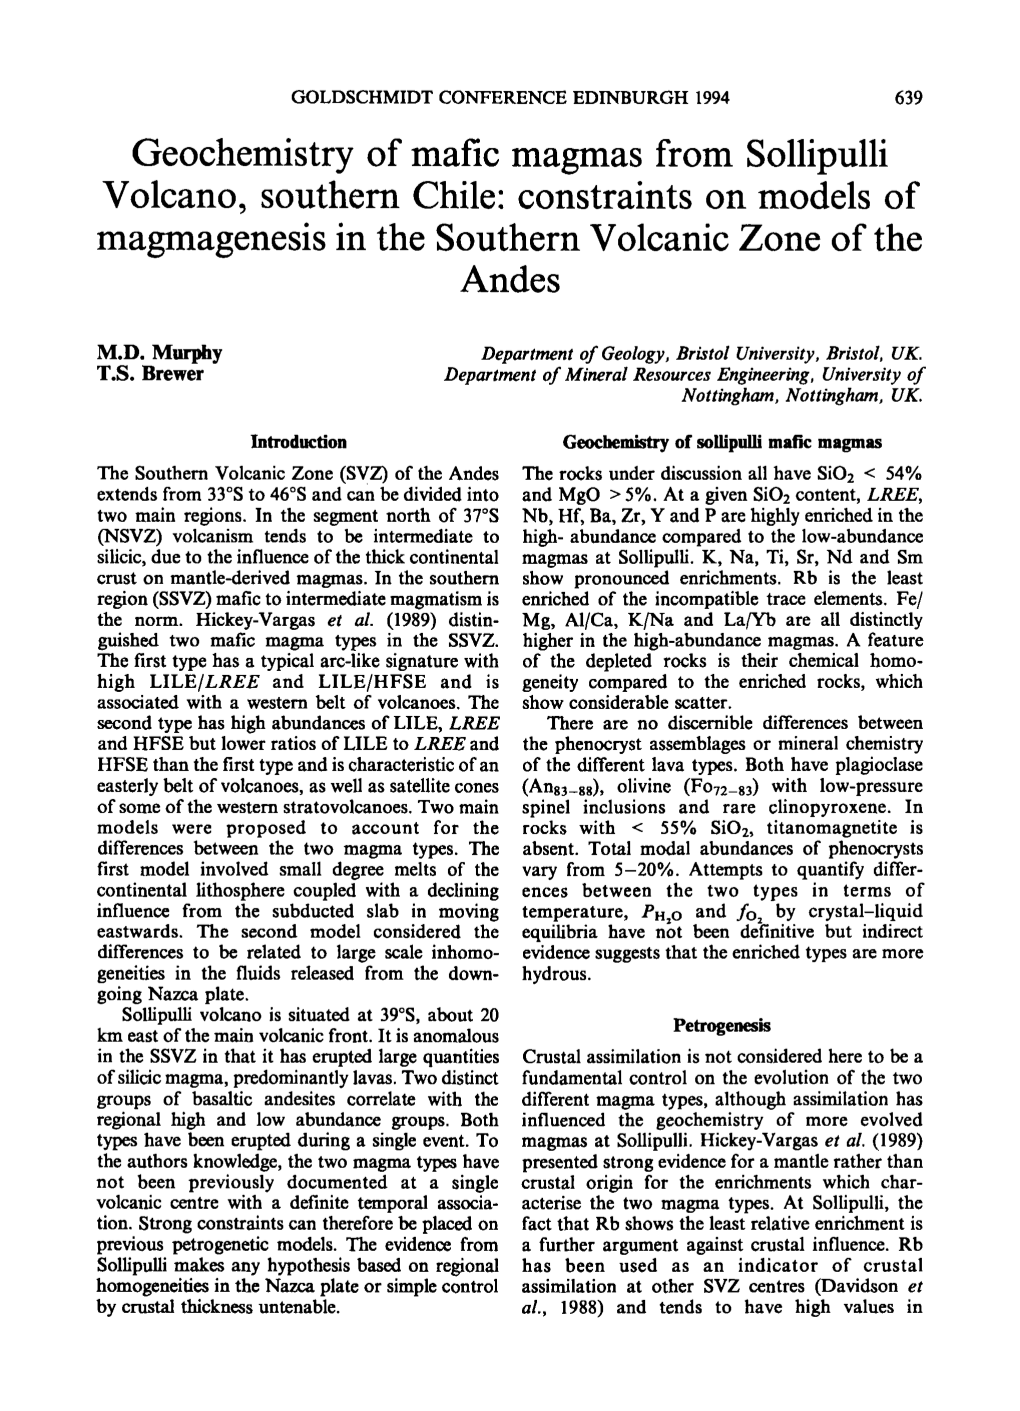 Geochemistry of Marie Magmas from Sollipulli Volcano, Southern Chile: Constraints on Models of Magmagenesis in the Southern Volcanic Zone of the Andes